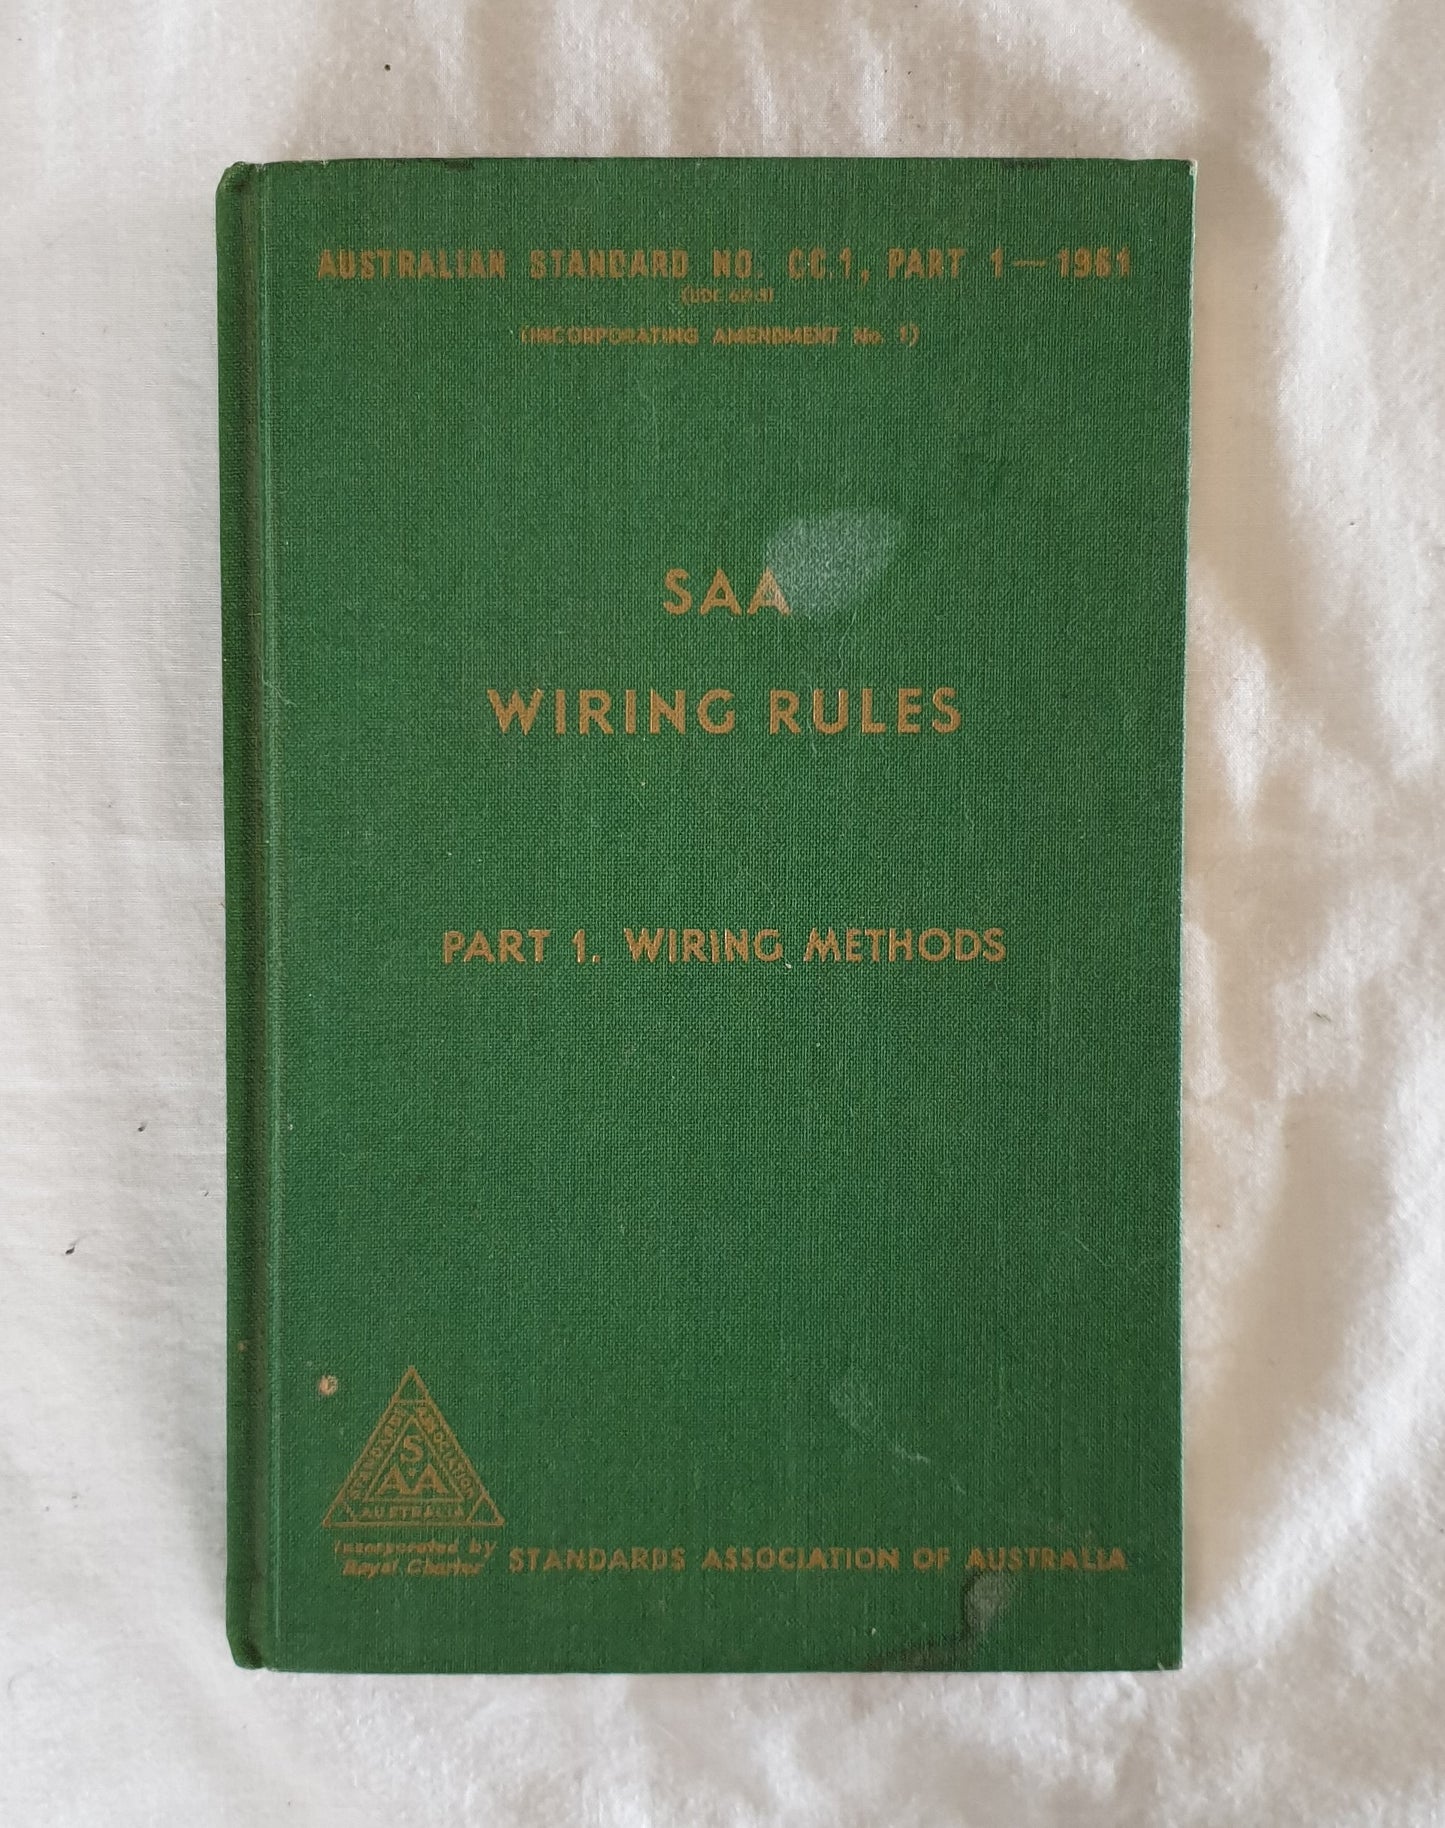 SAA Wiring Rules by The Standards Association of Australia